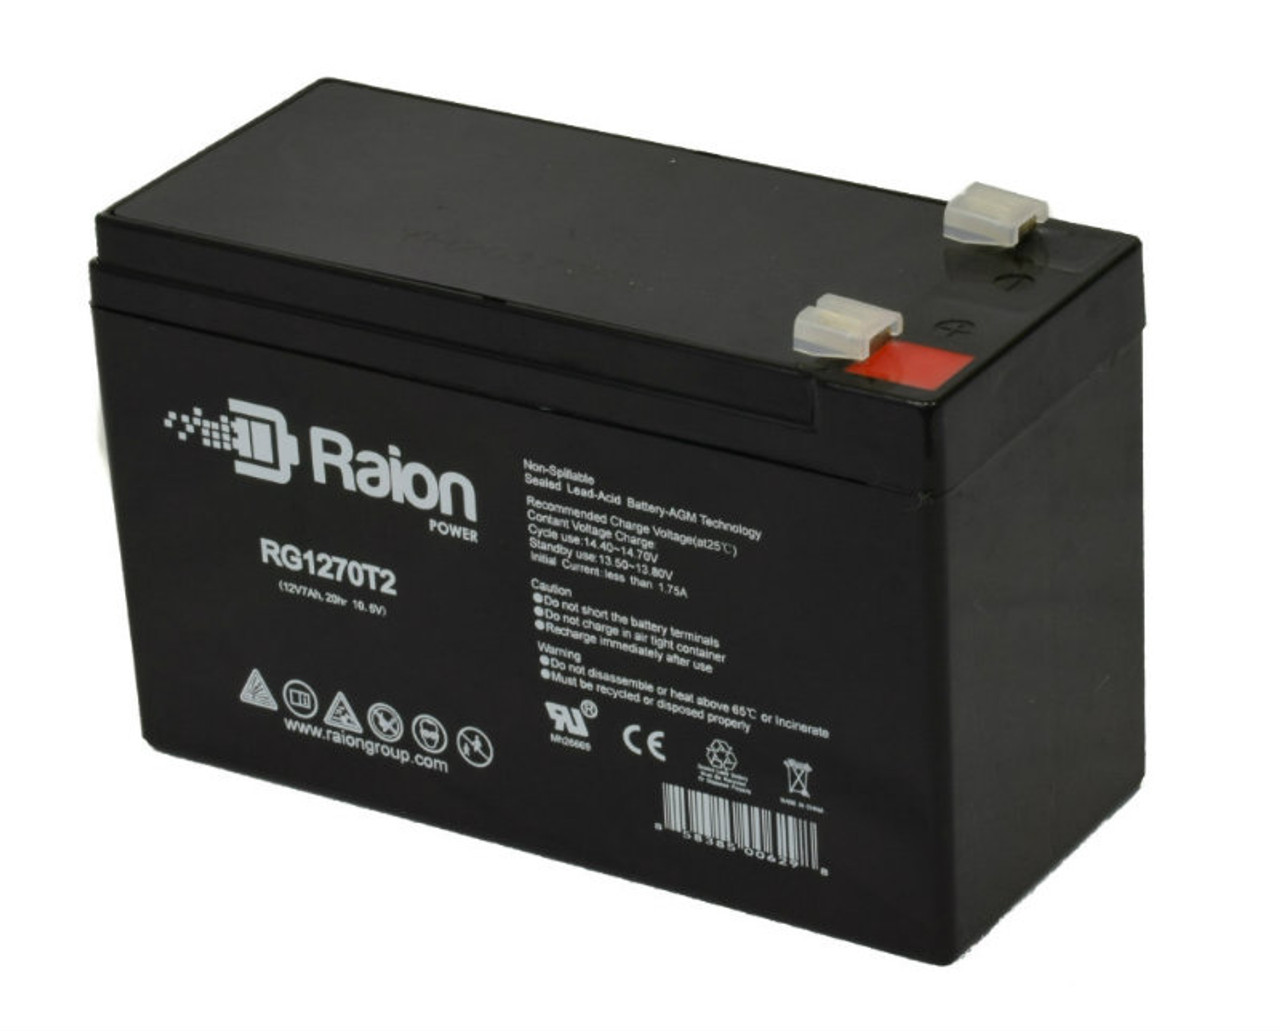 Raion Power RG1270T1 12V 7Ah Non-Spillable Replacement Battery for Koyo NP7-12 F1